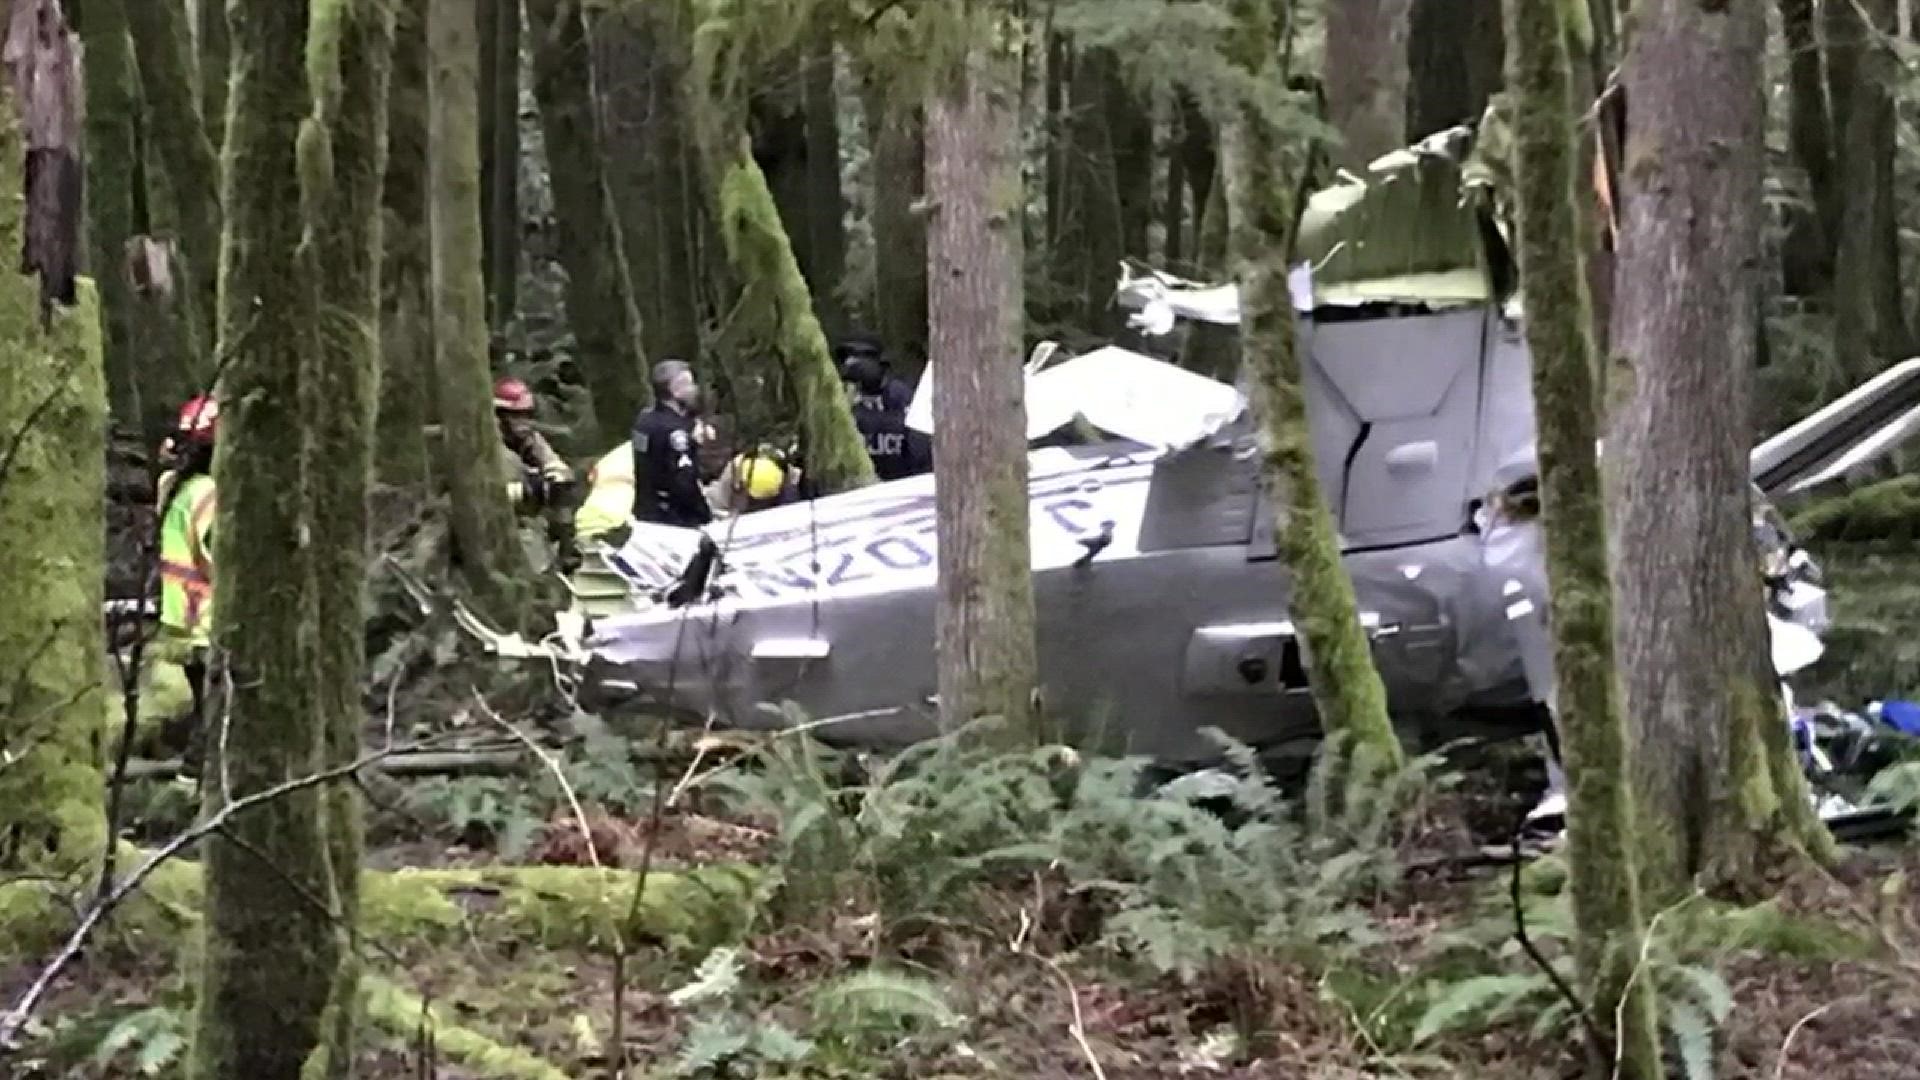 The pilot survived a small plane crash near Enumclaw, suffering two broken legs.